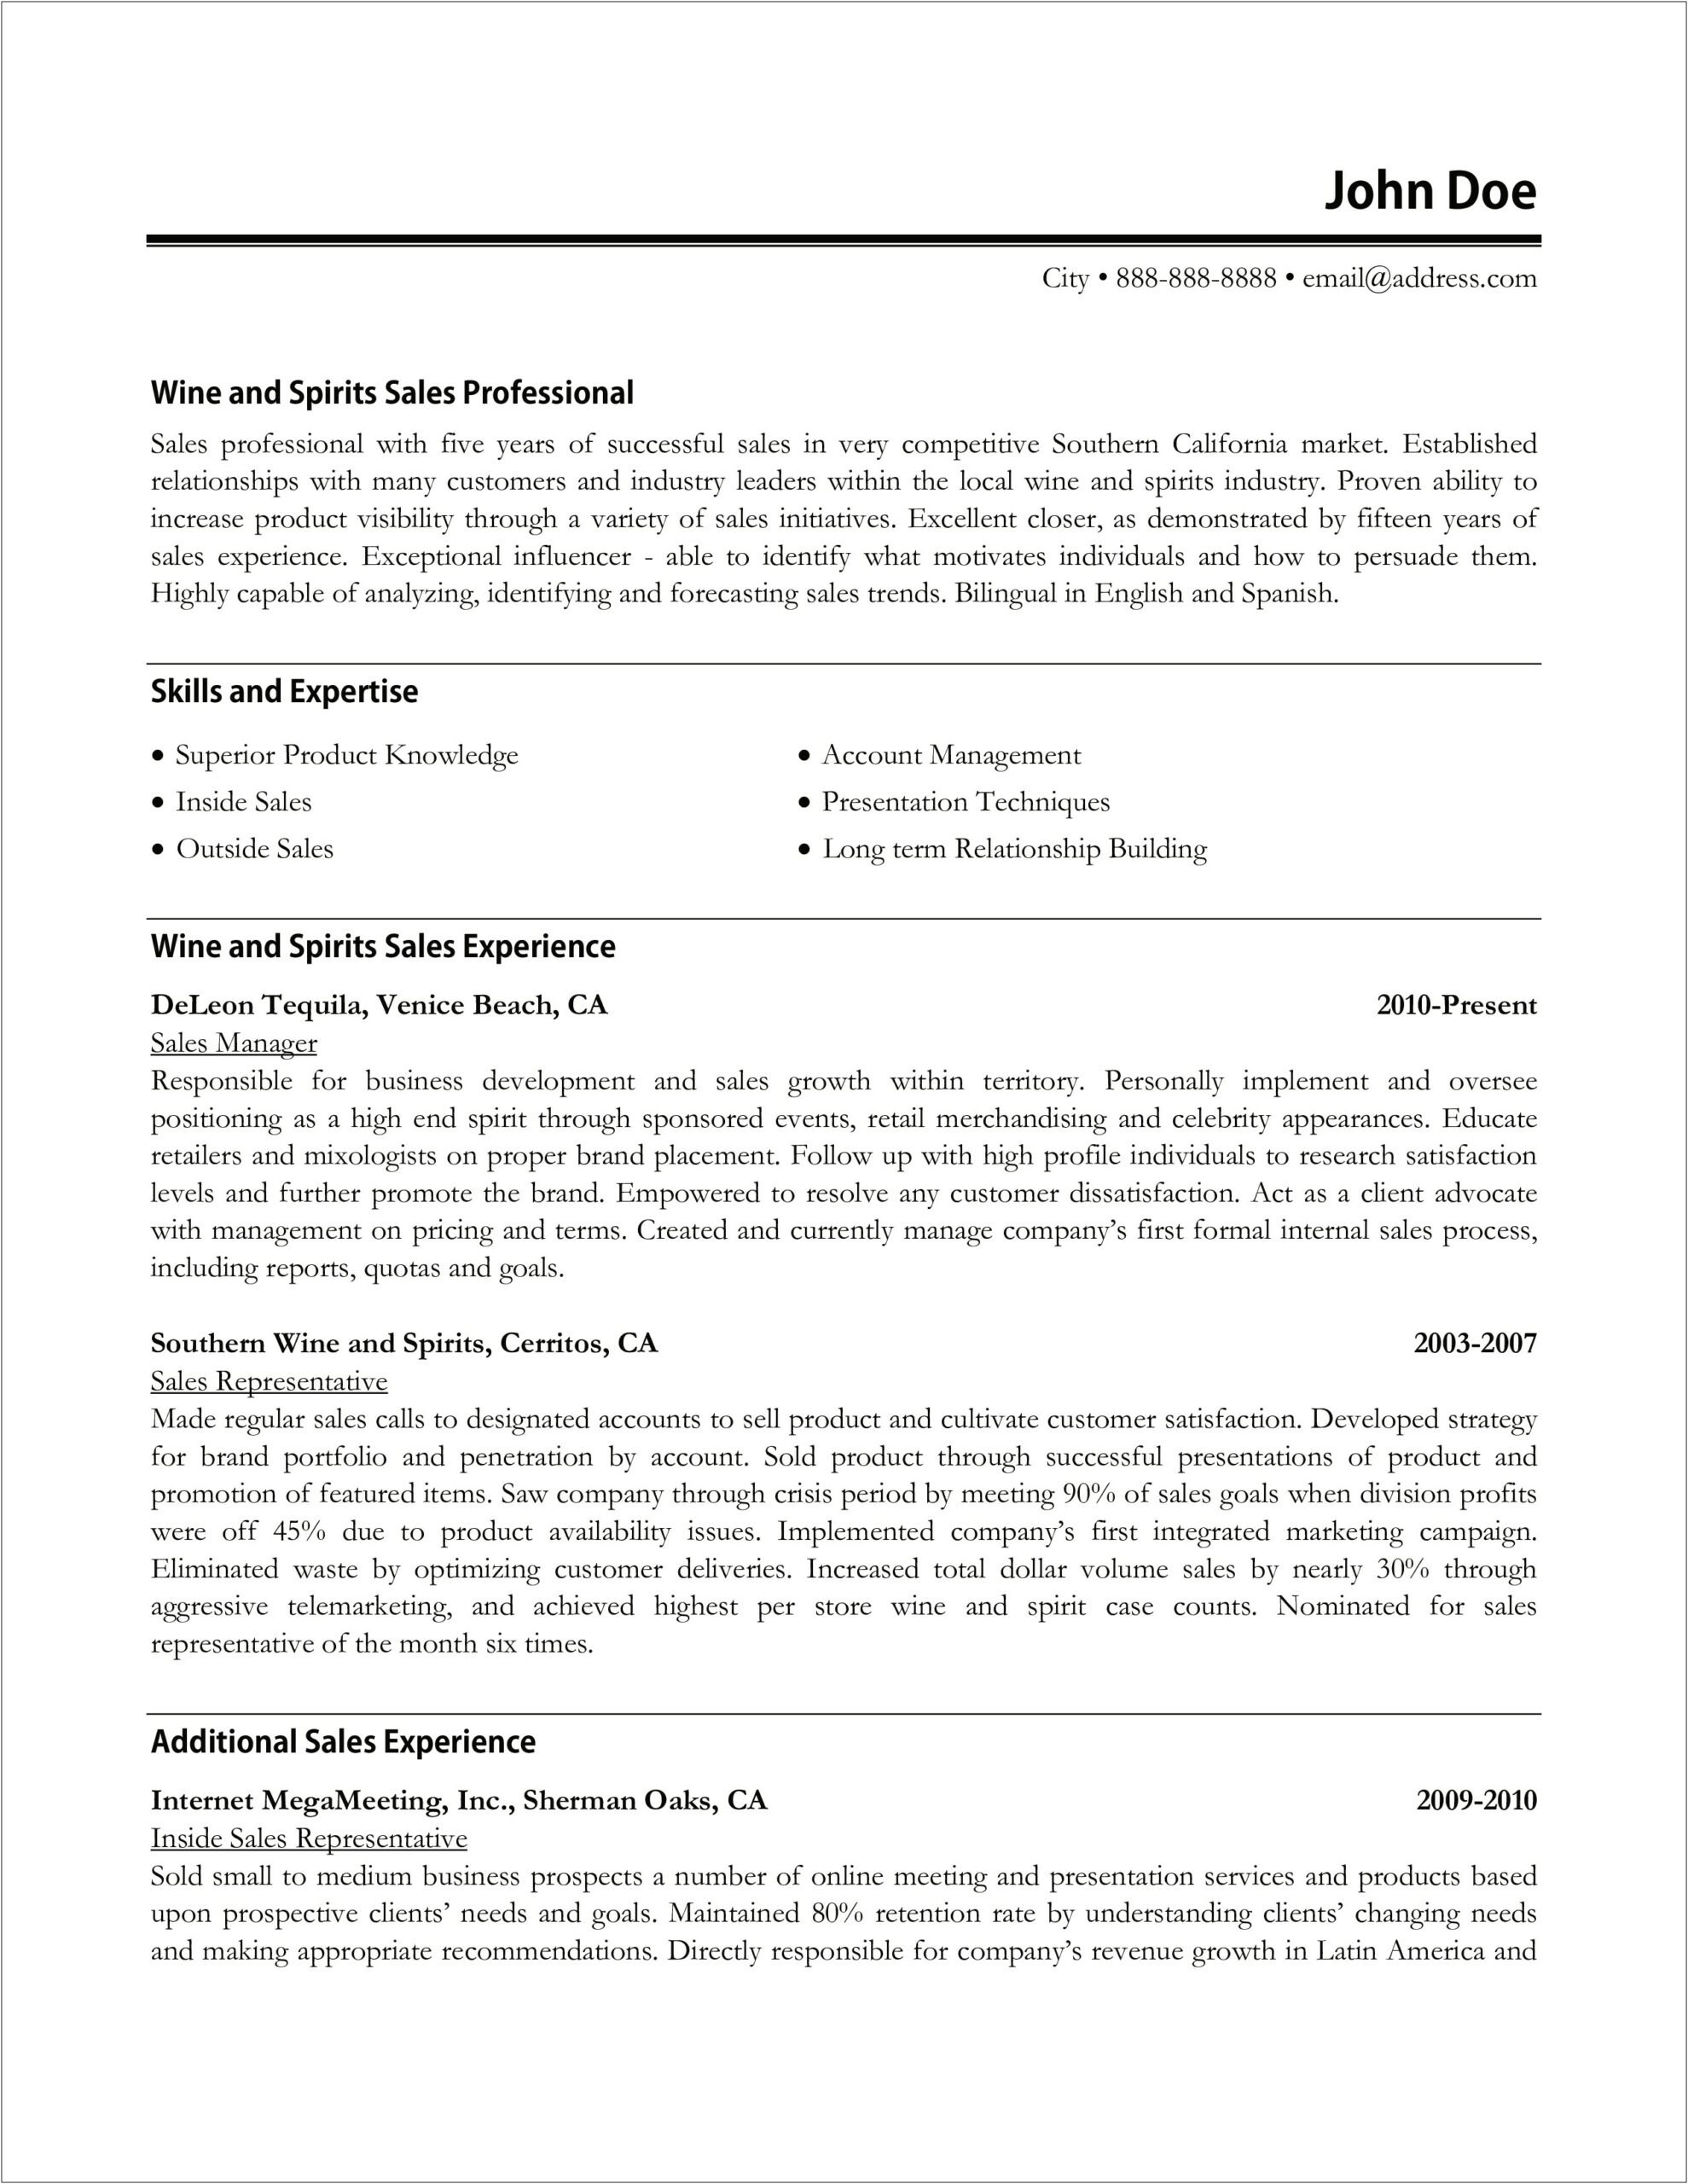 Sales Manager For Own Business Resume